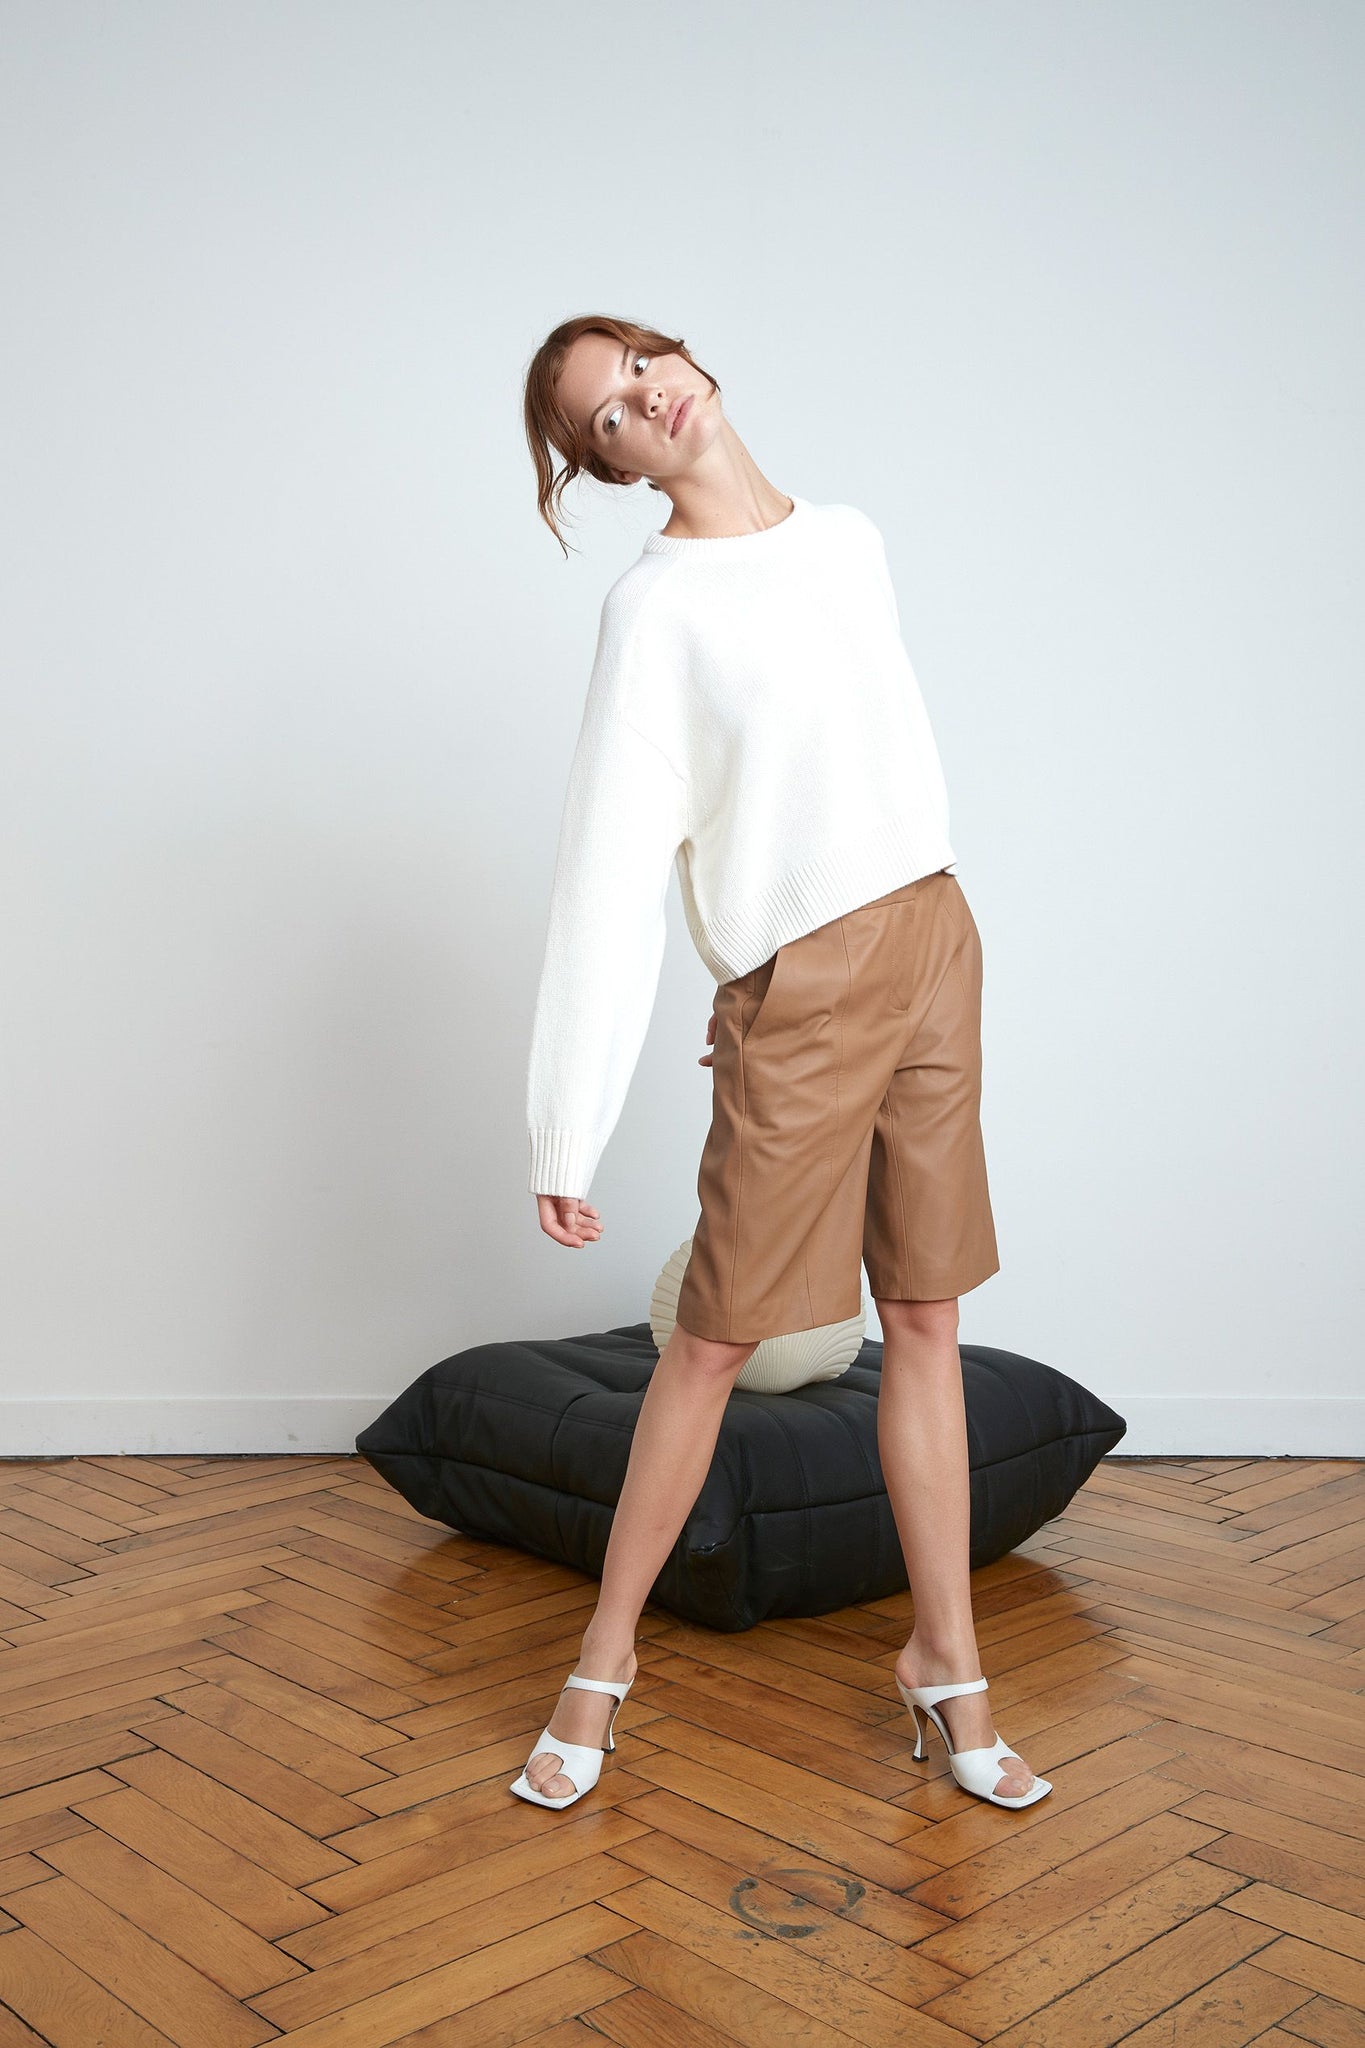 CASHMERE WOOL OVERSIZED CROPPED SWEATER IVORY BY LOULOU STUDIO - BEYOND STUDIOS